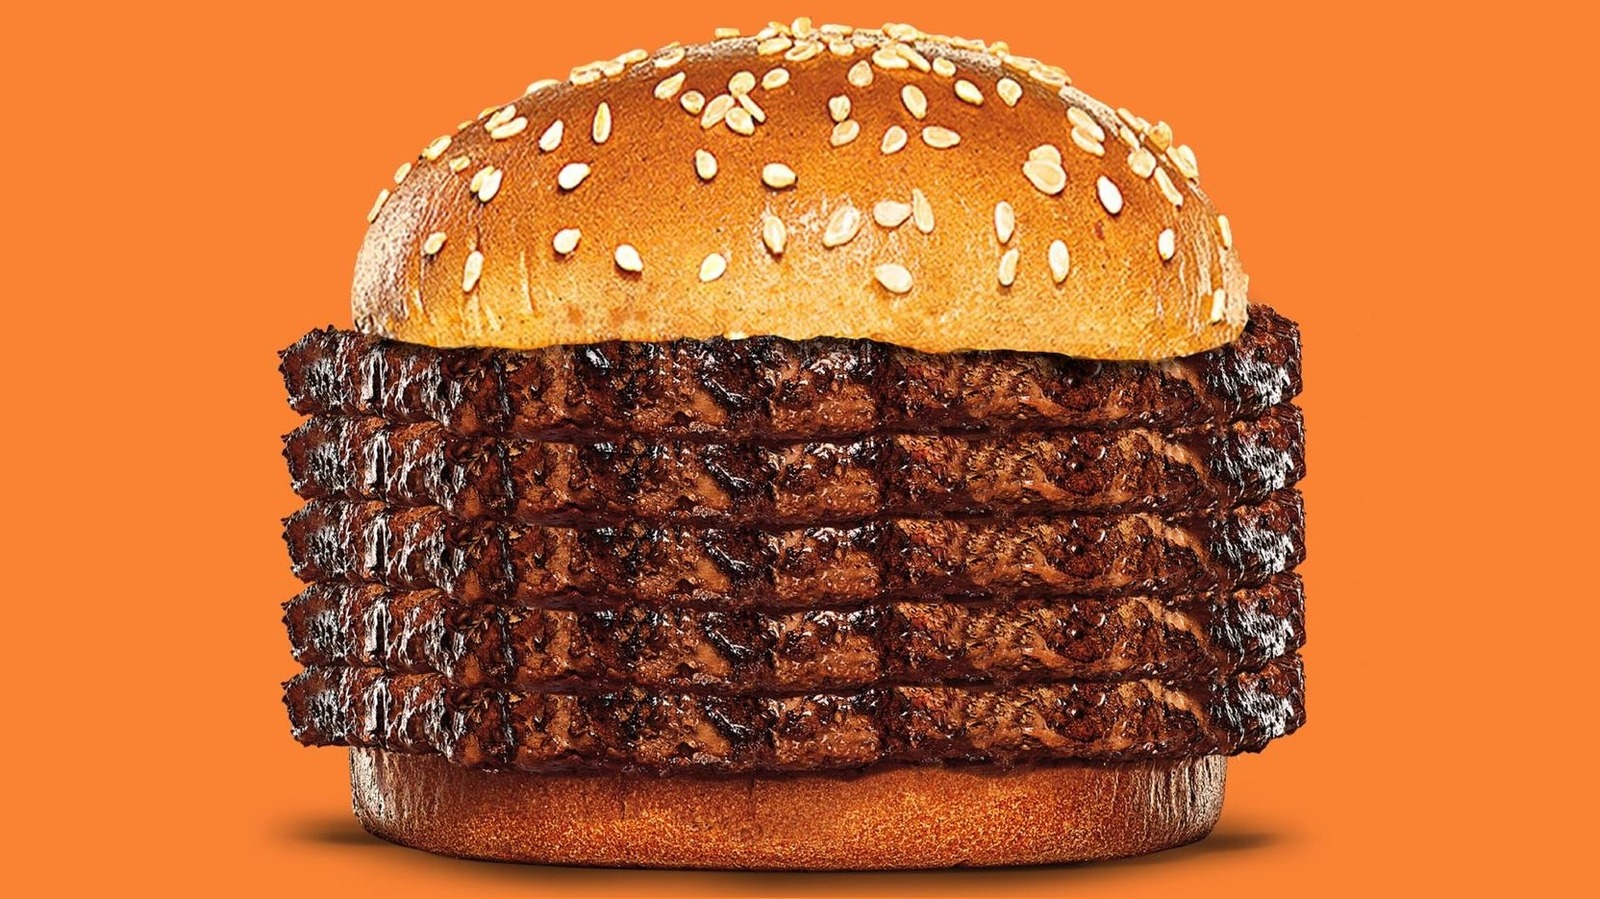 https://www.mashed.com/img/gallery/burger-kings-real-meat-burger-is-so-extra-it-seems-fake/l-intro-1689981859.jpg